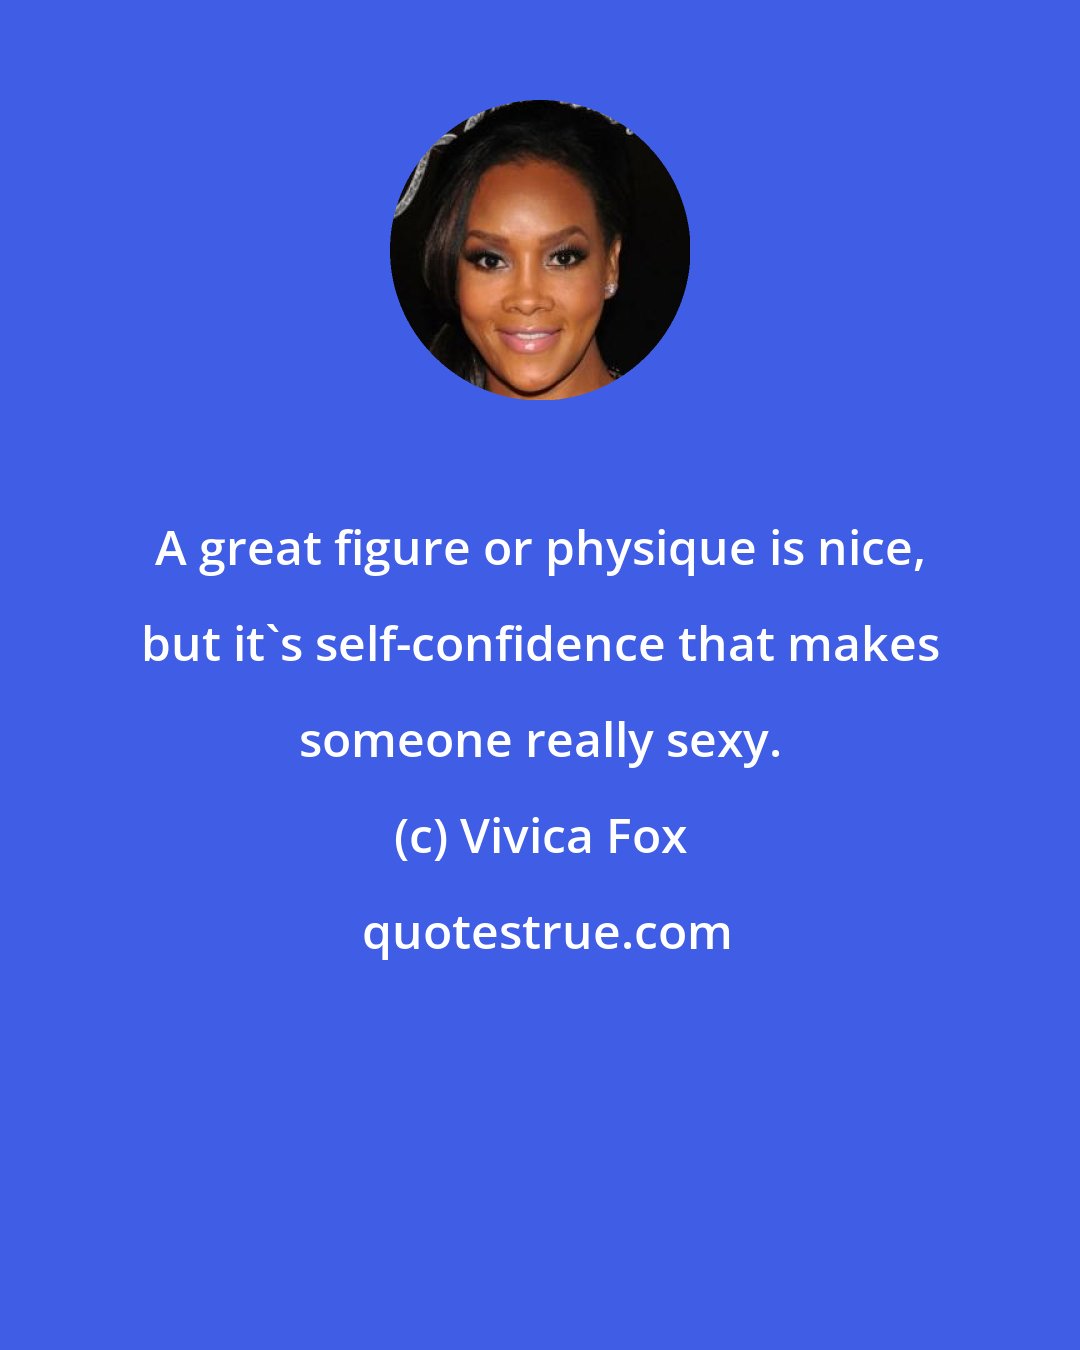 Vivica Fox: A great figure or physique is nice, but it's self-confidence that makes someone really sexy.